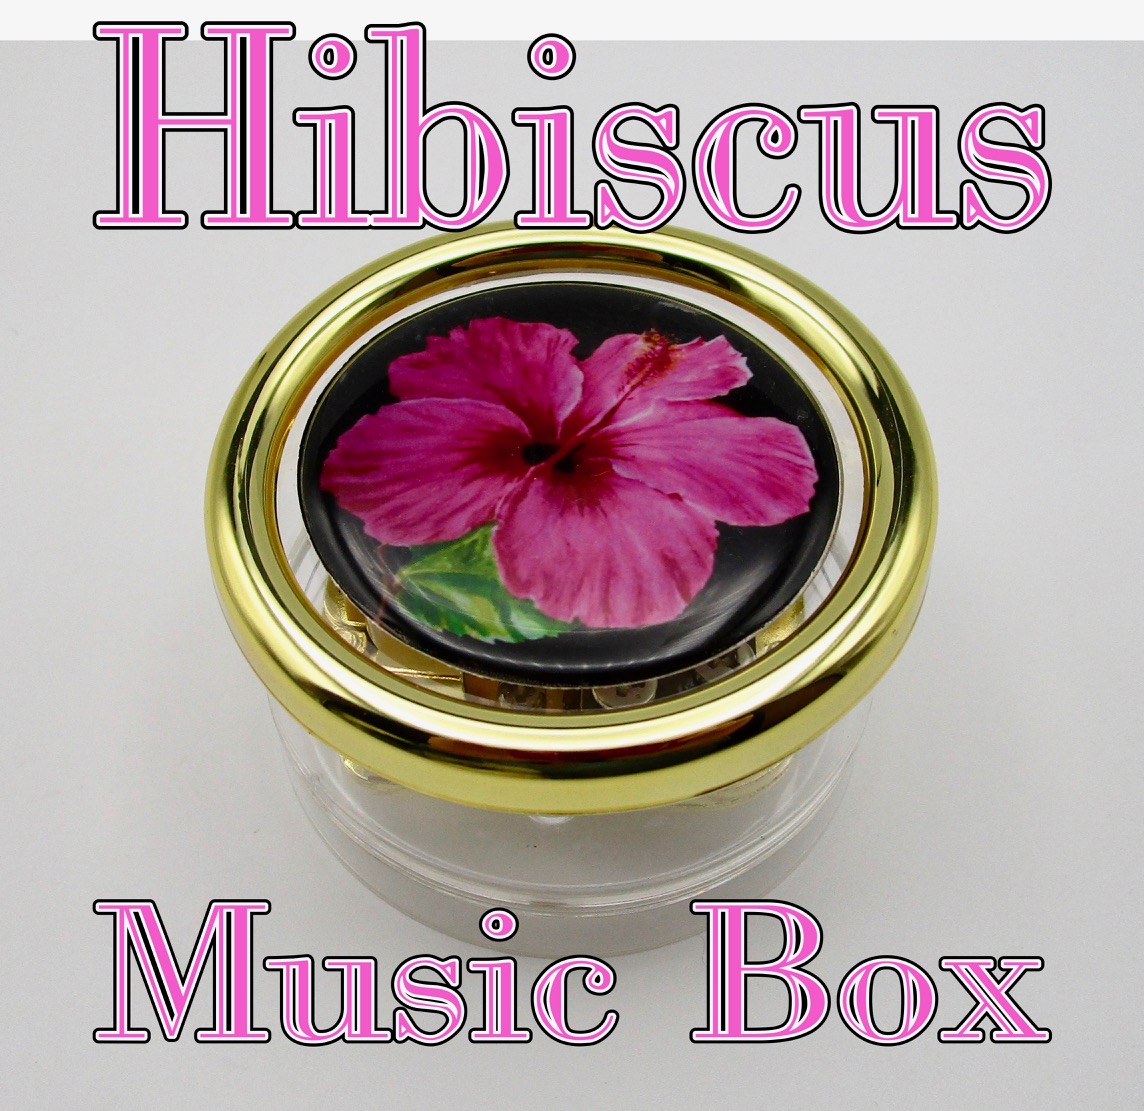 Our Bright Pink Hibiscus music box is a perfect gift for your tropical wedding party! #TropicalWedding etsy.me/3k7af6f